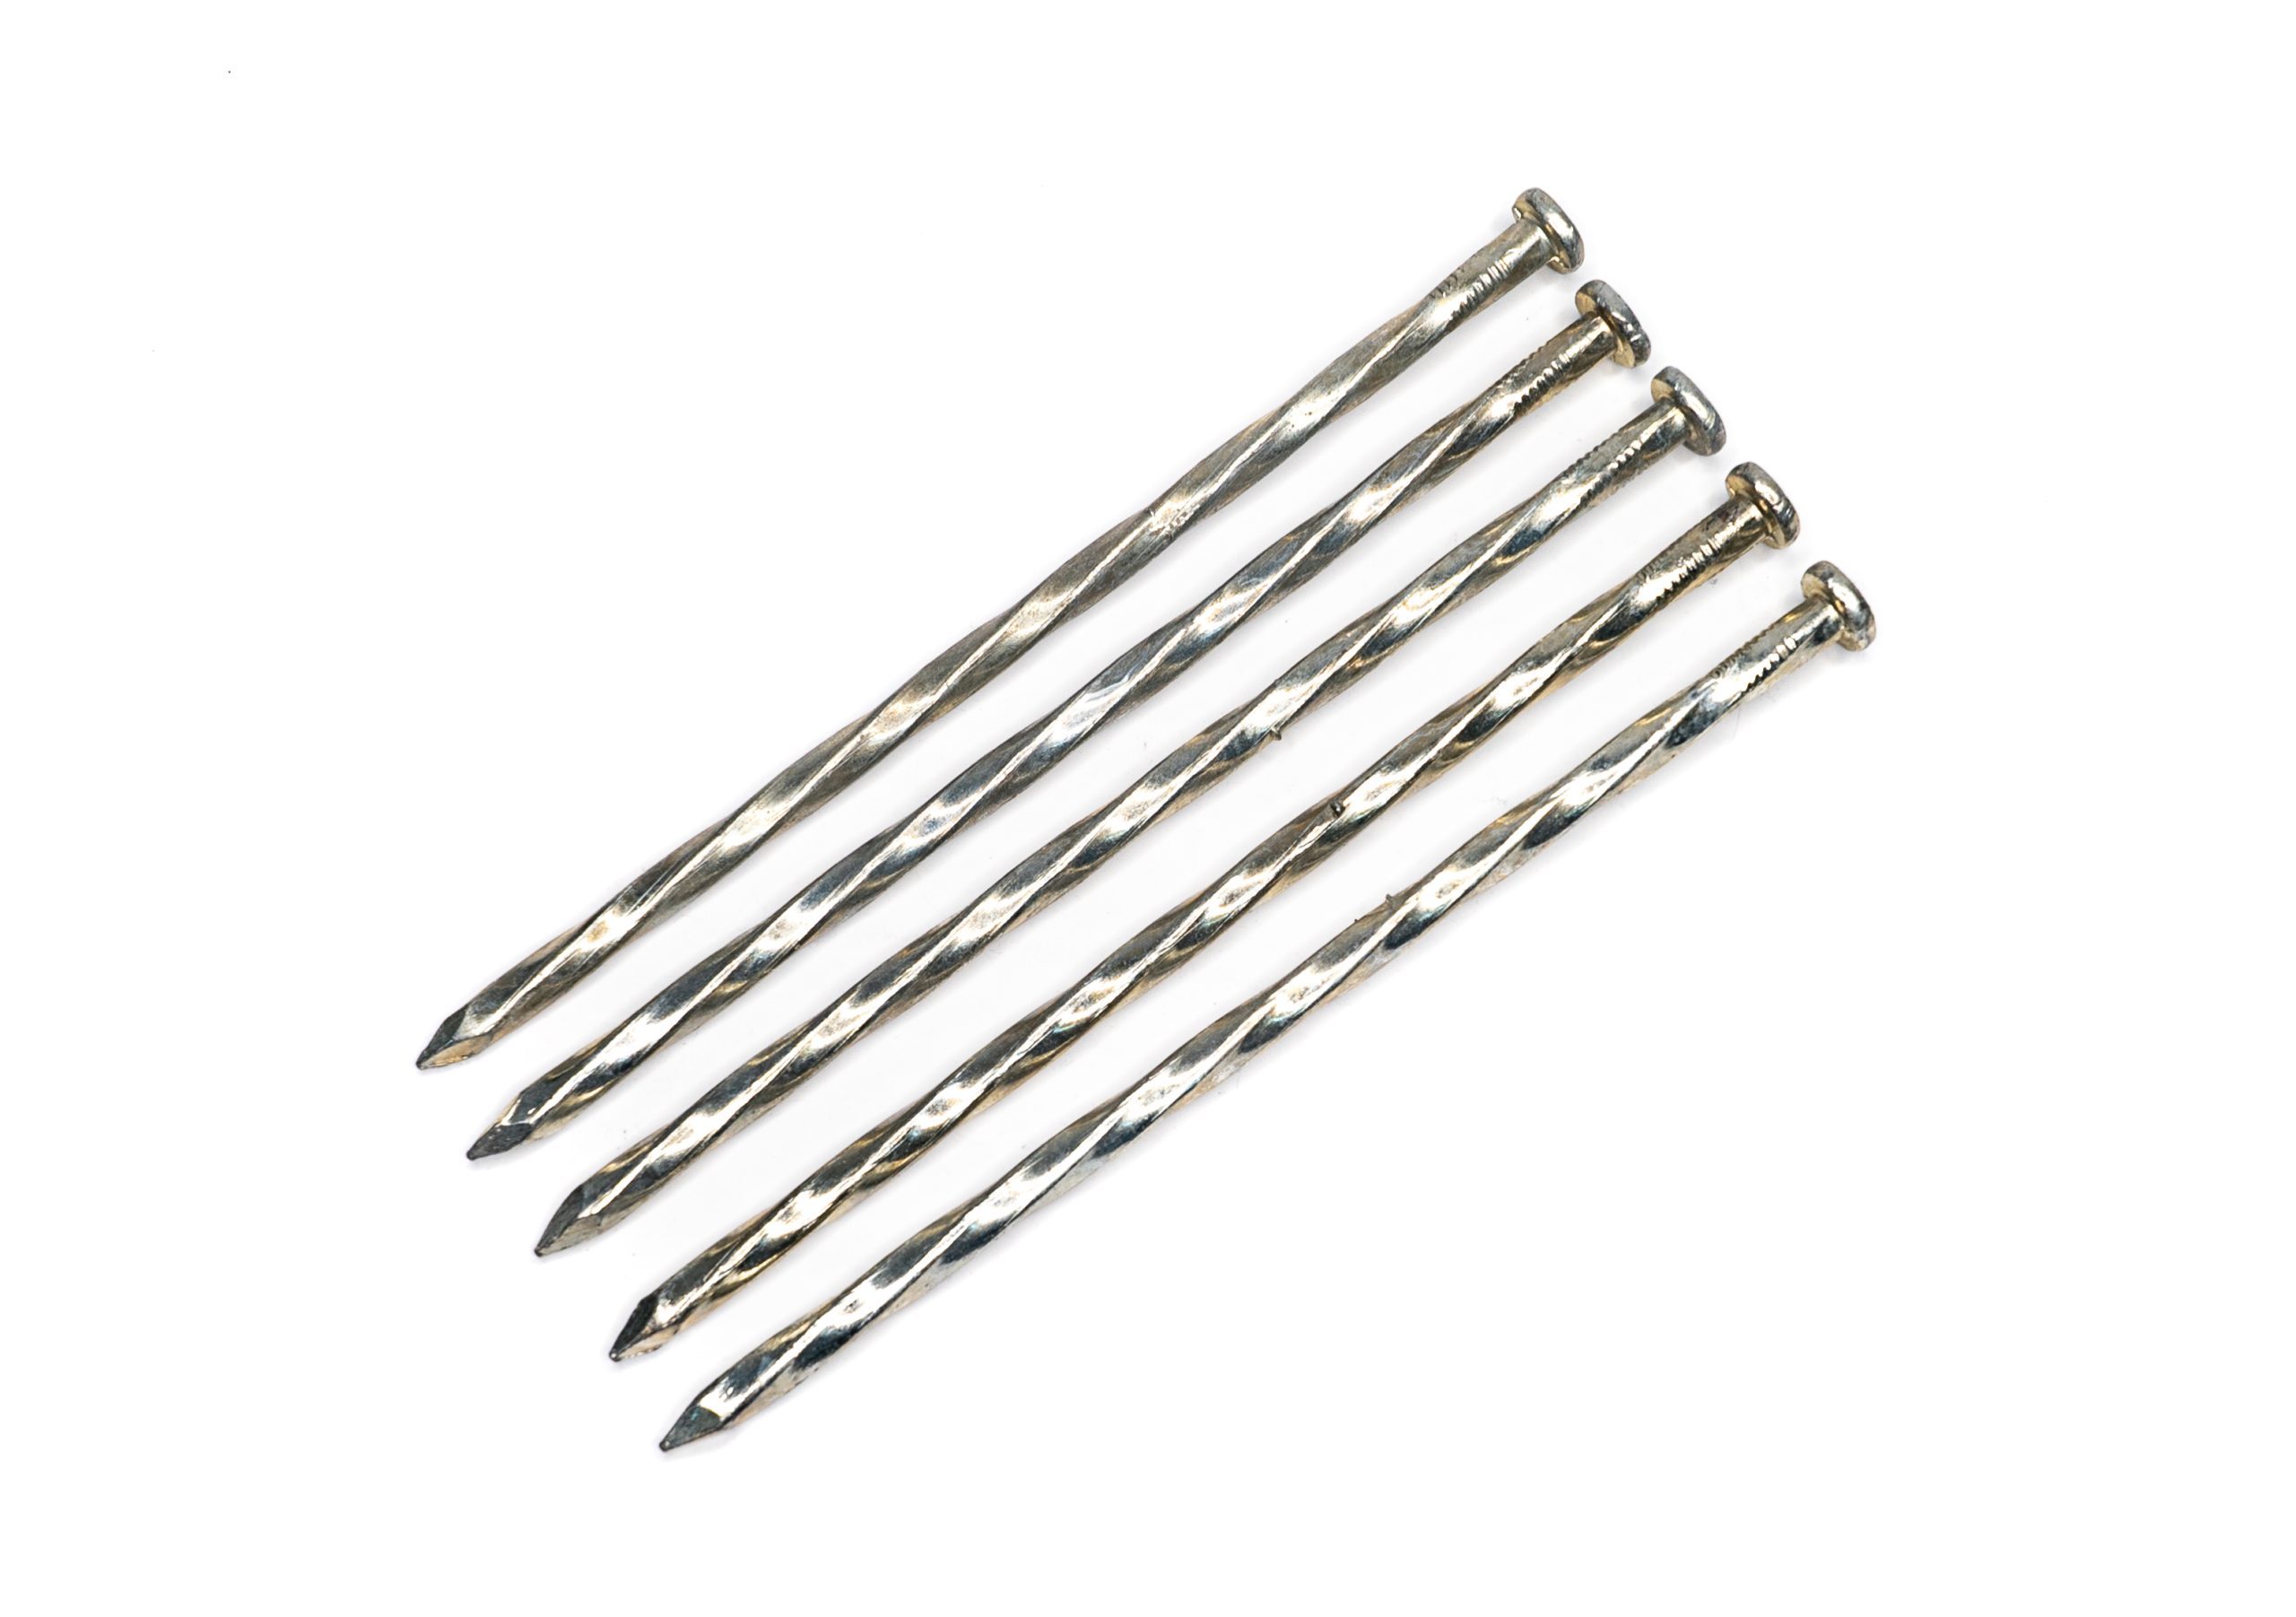 Amazon.com : MUKLEI 120 PCS Metal Spiral Nails, 6 Inch Metal Artificial  Turf Stakes Garden Landscape Timber Spikes Anchors for Paver Edging,  Camping Timber, Weed Fabric, Gold : Patio, Lawn & Garden